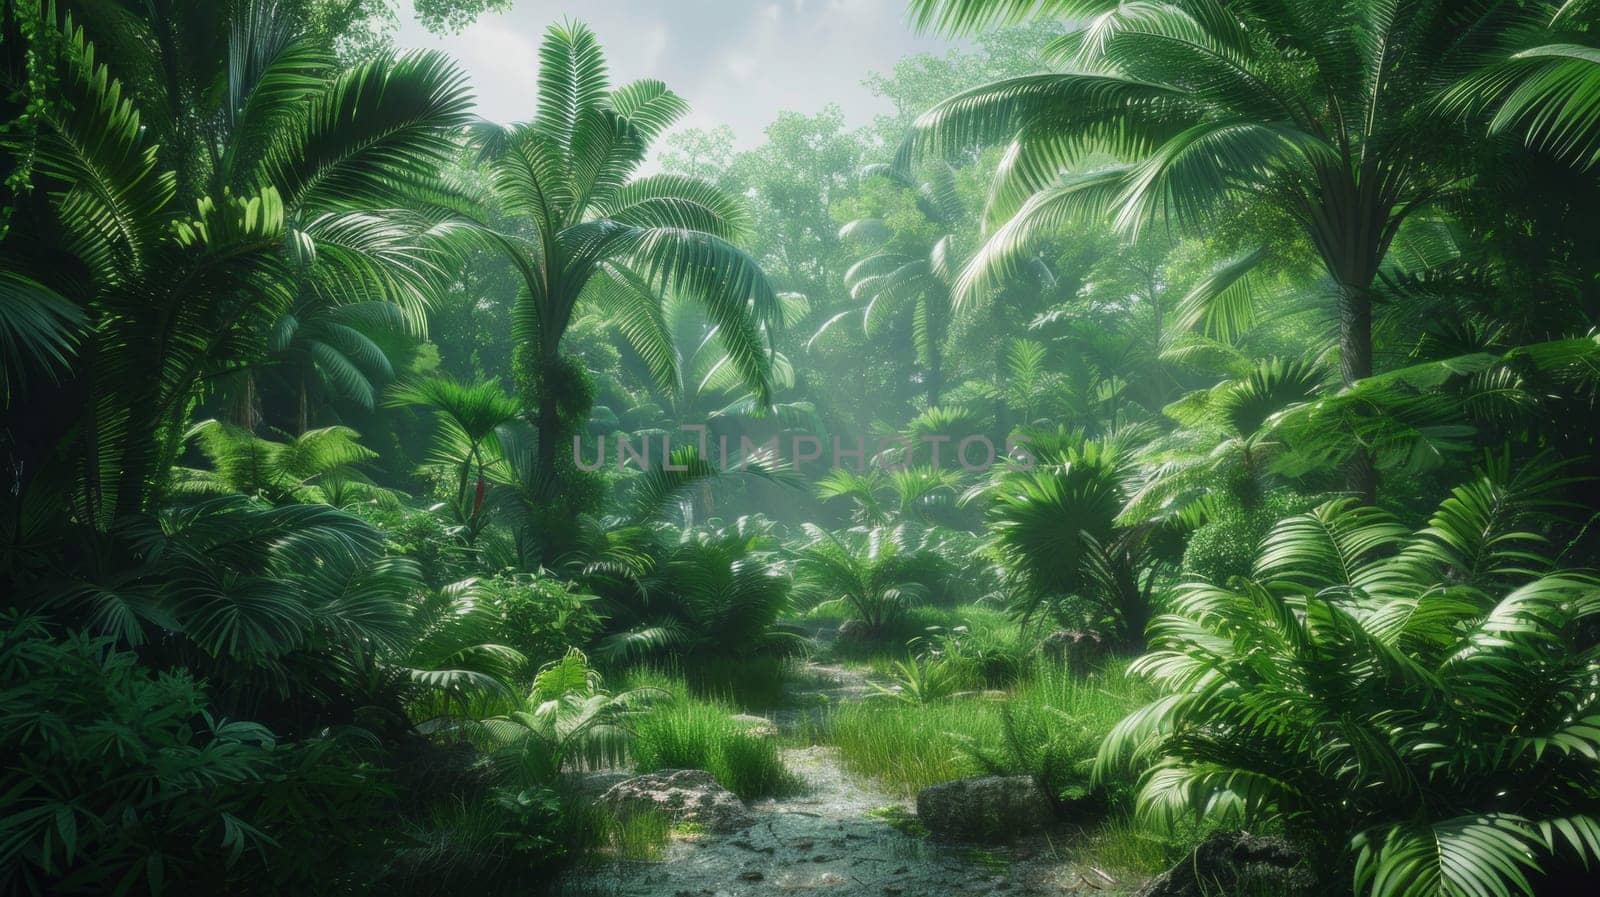 A stream of water flowing through a lush jungle filled with trees, AI by starush